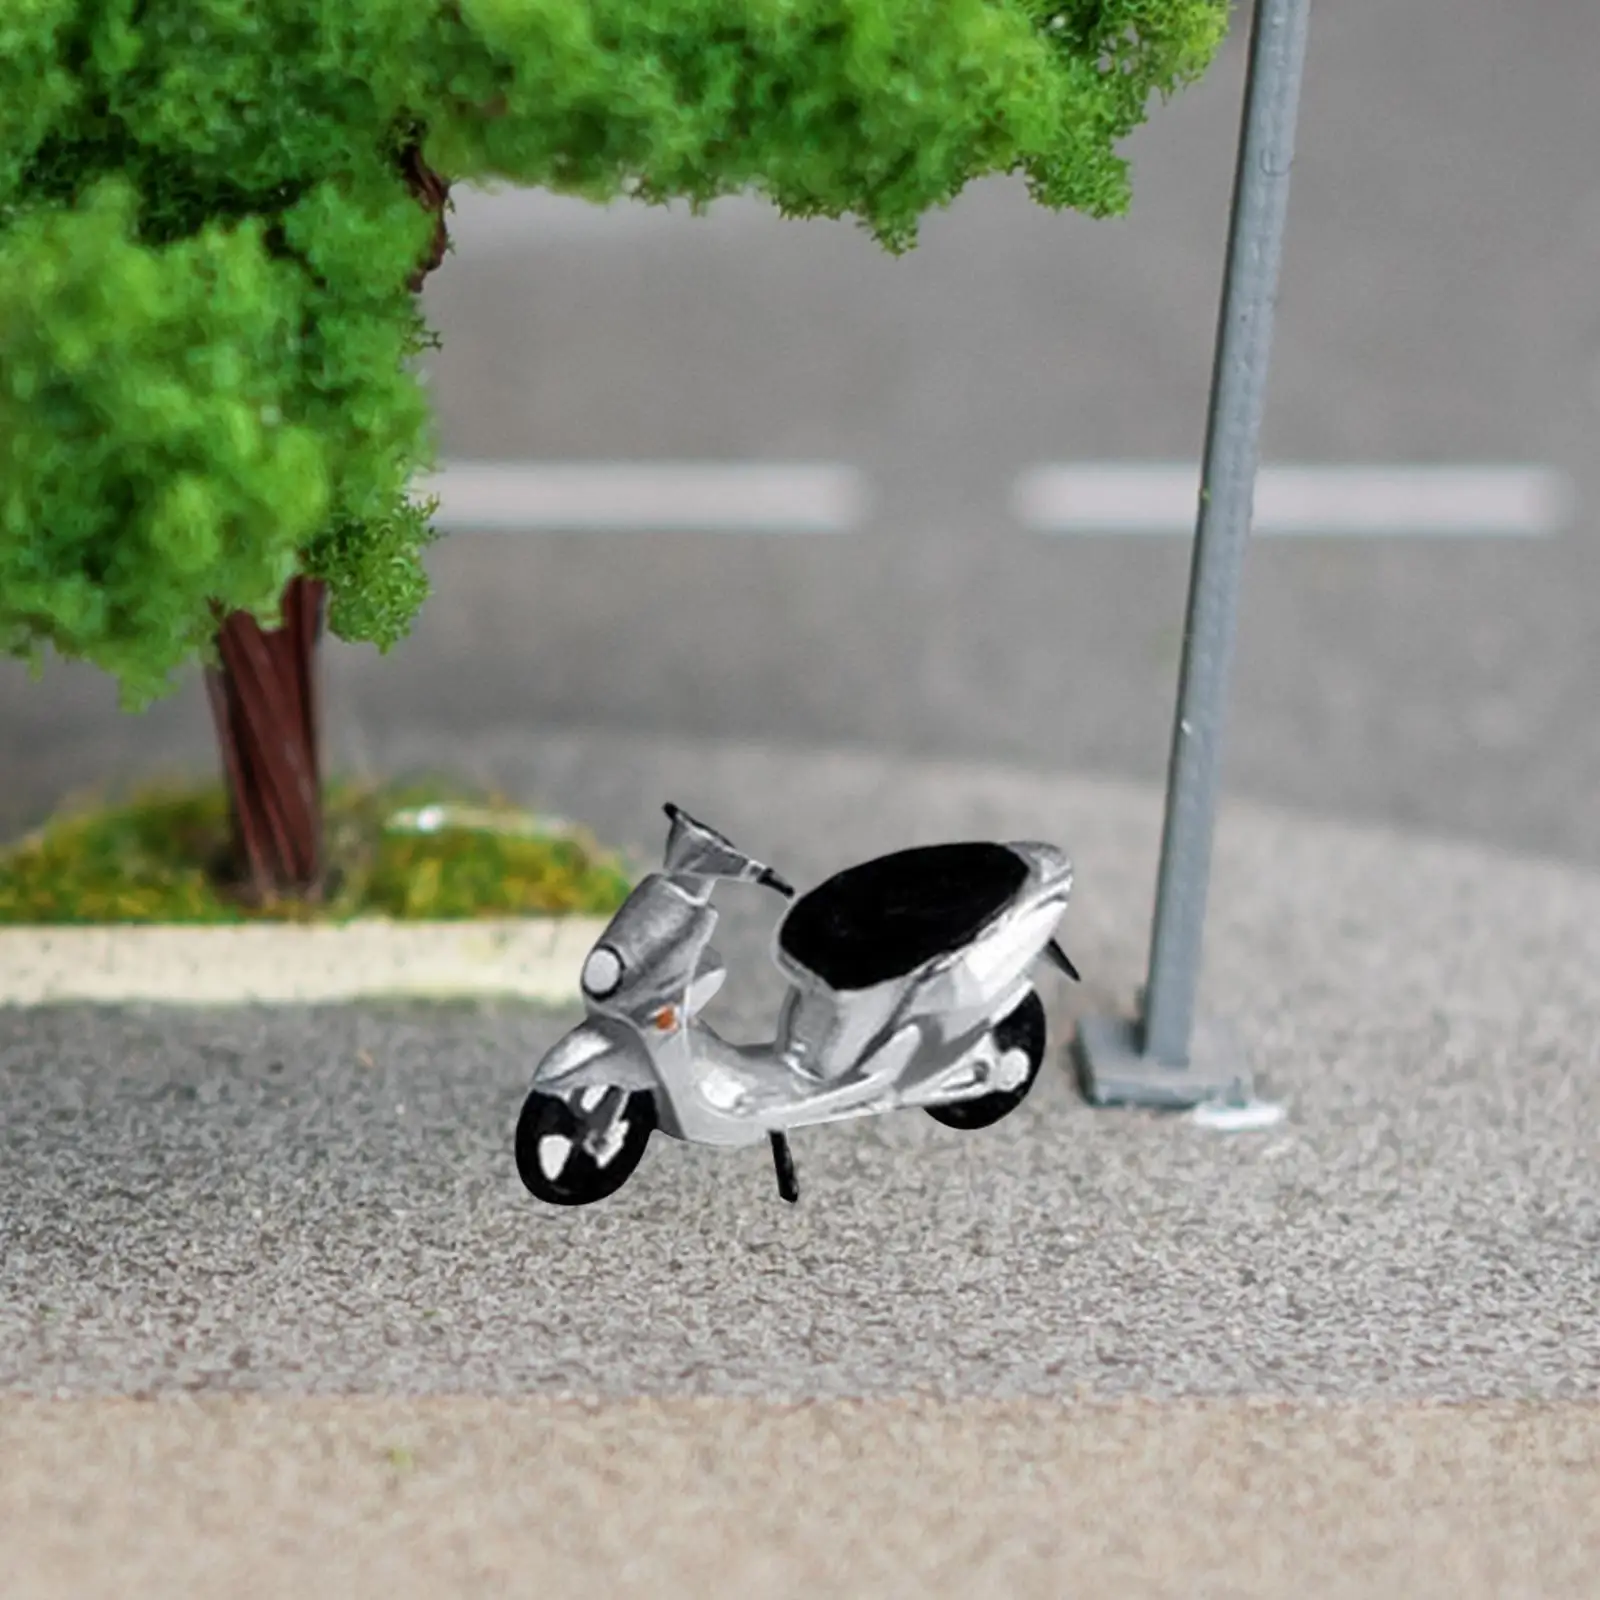 1/64 Motorcycle Model Figure Resin Sand Table Ornament Mini Vehicles Toys for DIY Scene Photography Props Dollhouse Layout Decor